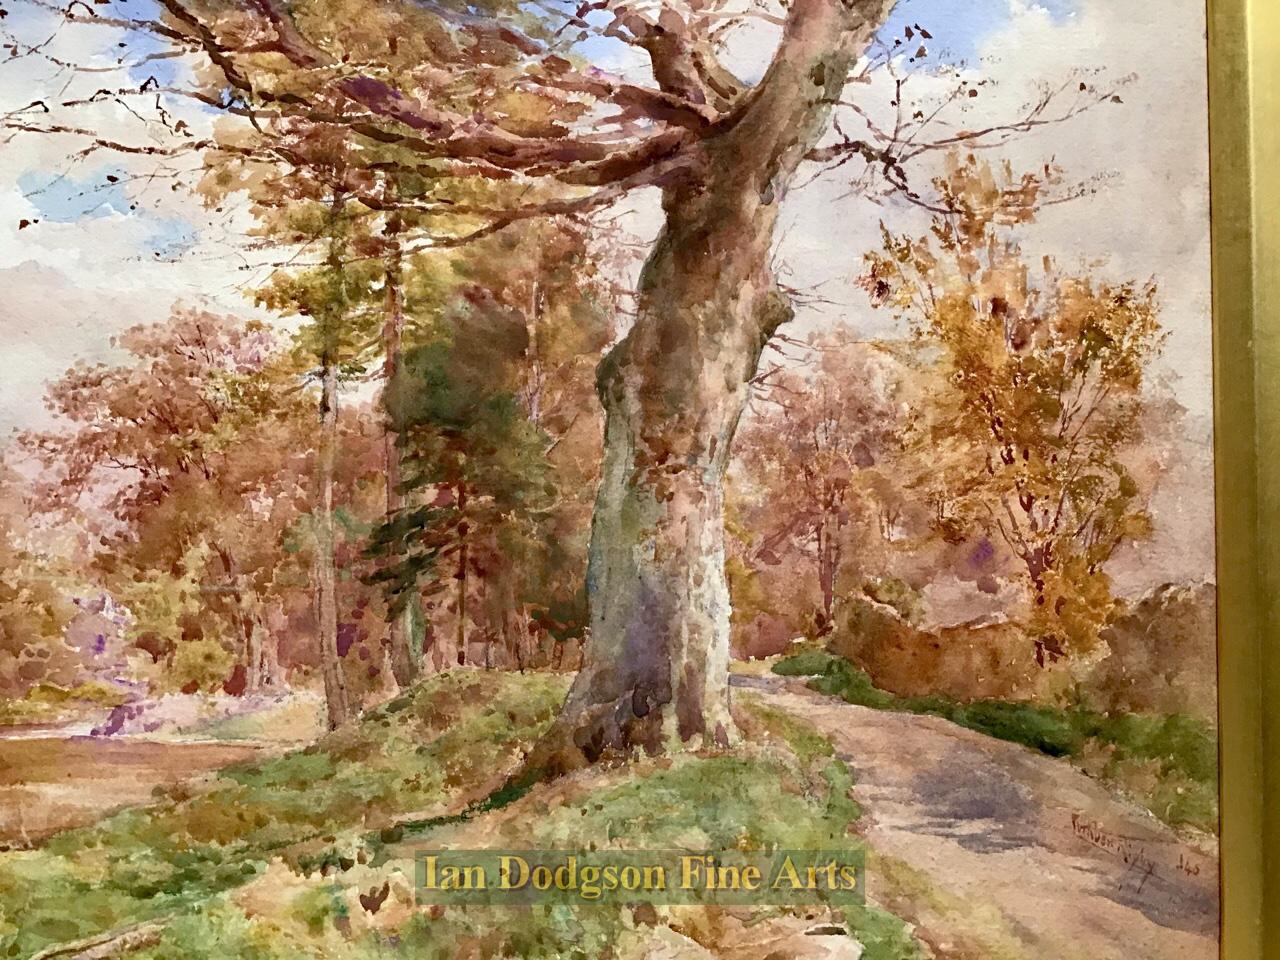 Autumnal Landscape by Cuthbert Rigby 